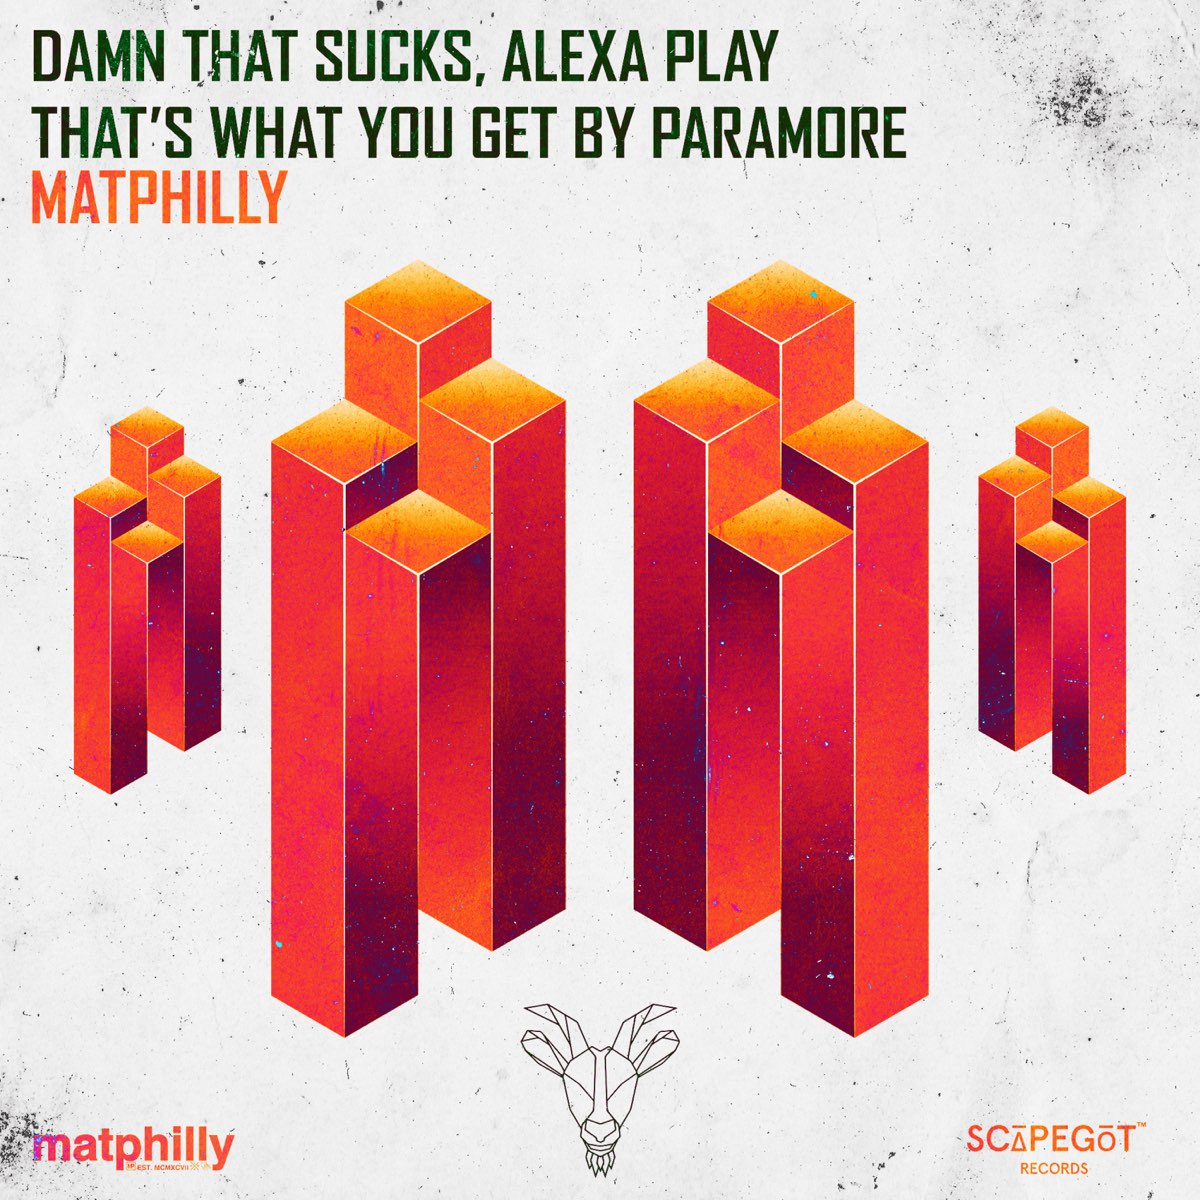 Damn That Sucks, Alexa Play That's What You Get By Paramore - Single -  Album by matphilly - Apple Music